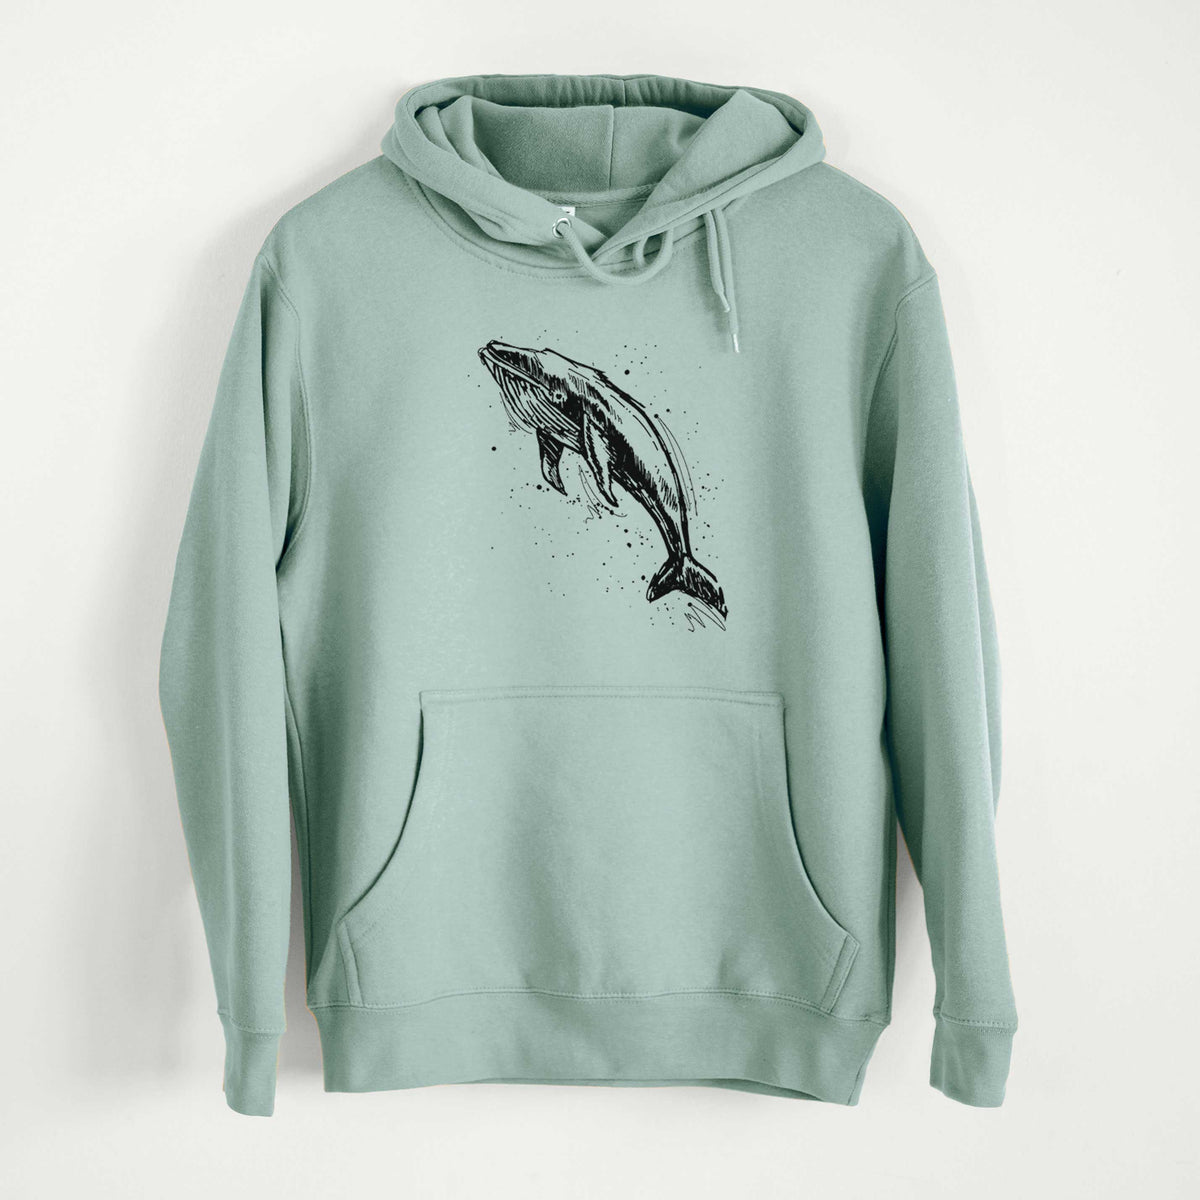 Humpback Whale  - Mid-Weight Unisex Premium Blend Hoodie